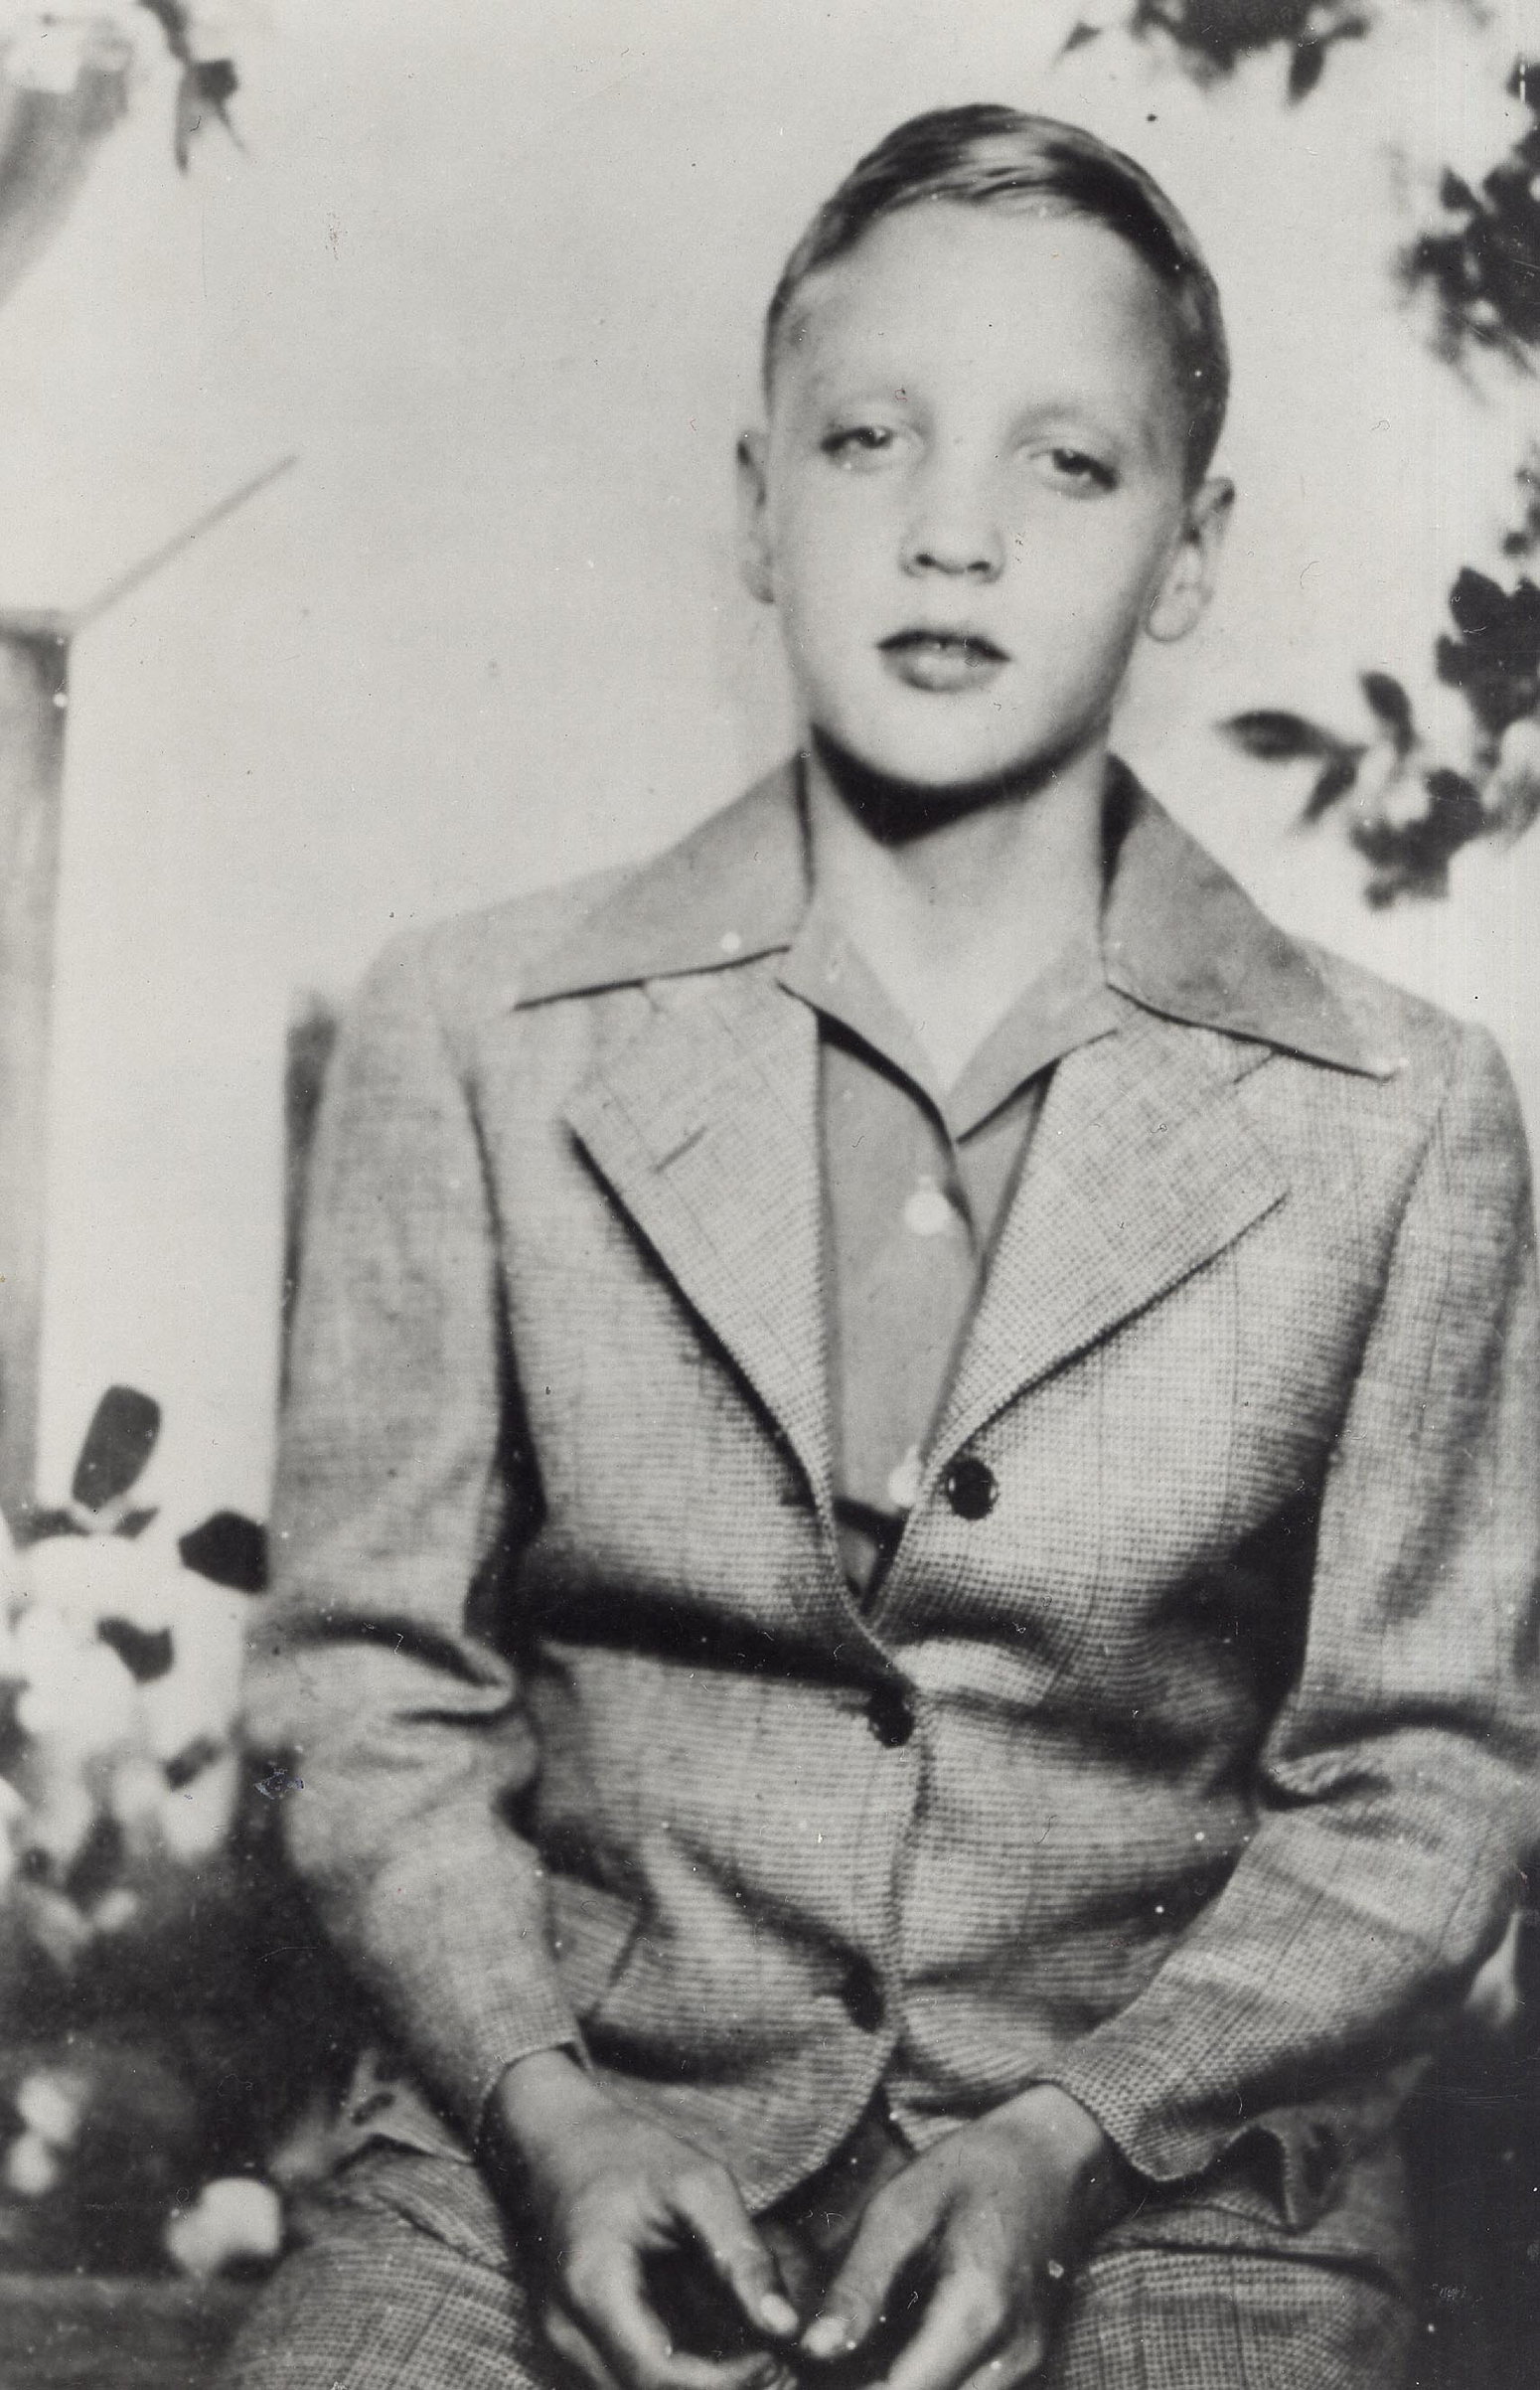 Elvis at approximately 12 years old.